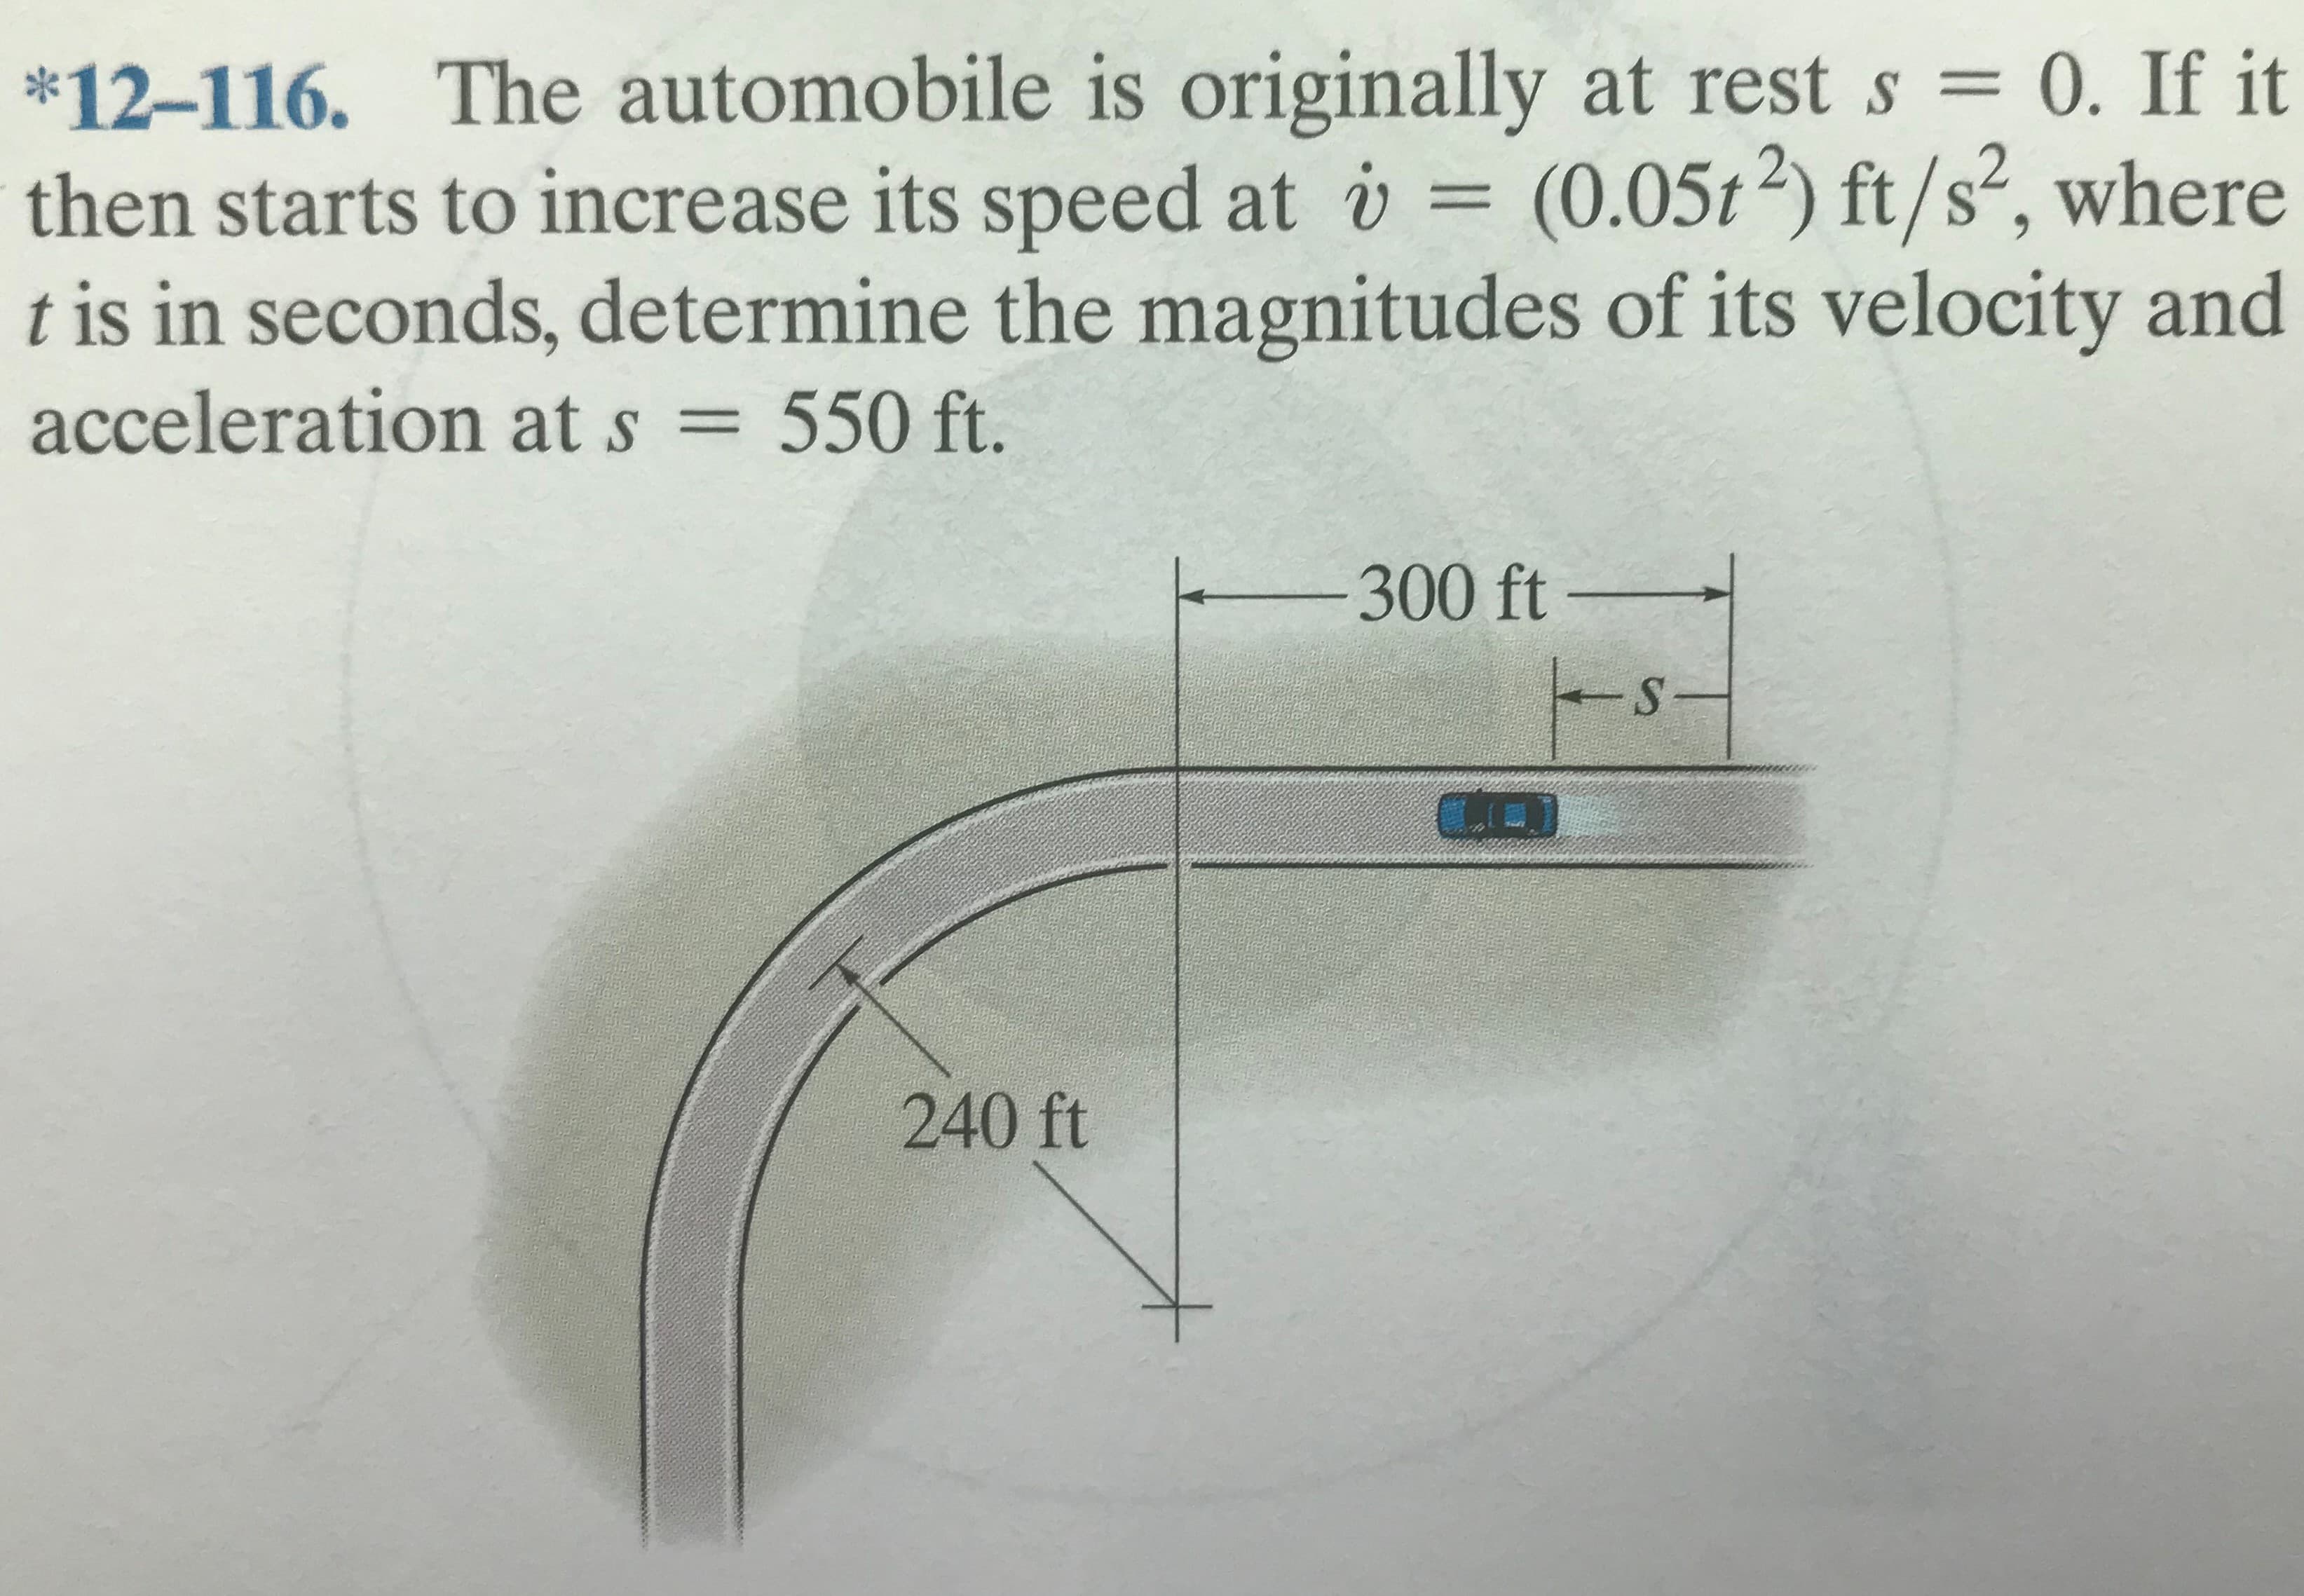 The automobile is originally at rest s = 0. If it
(0.05t2) ft/s², where
t is in seconds, determine the magnitudes of its velocity and
*12-116.
%3D
then starts to increase its speed at v =
acceleration at s = 550 ft.
%3D
300 ft
-
240 ft
